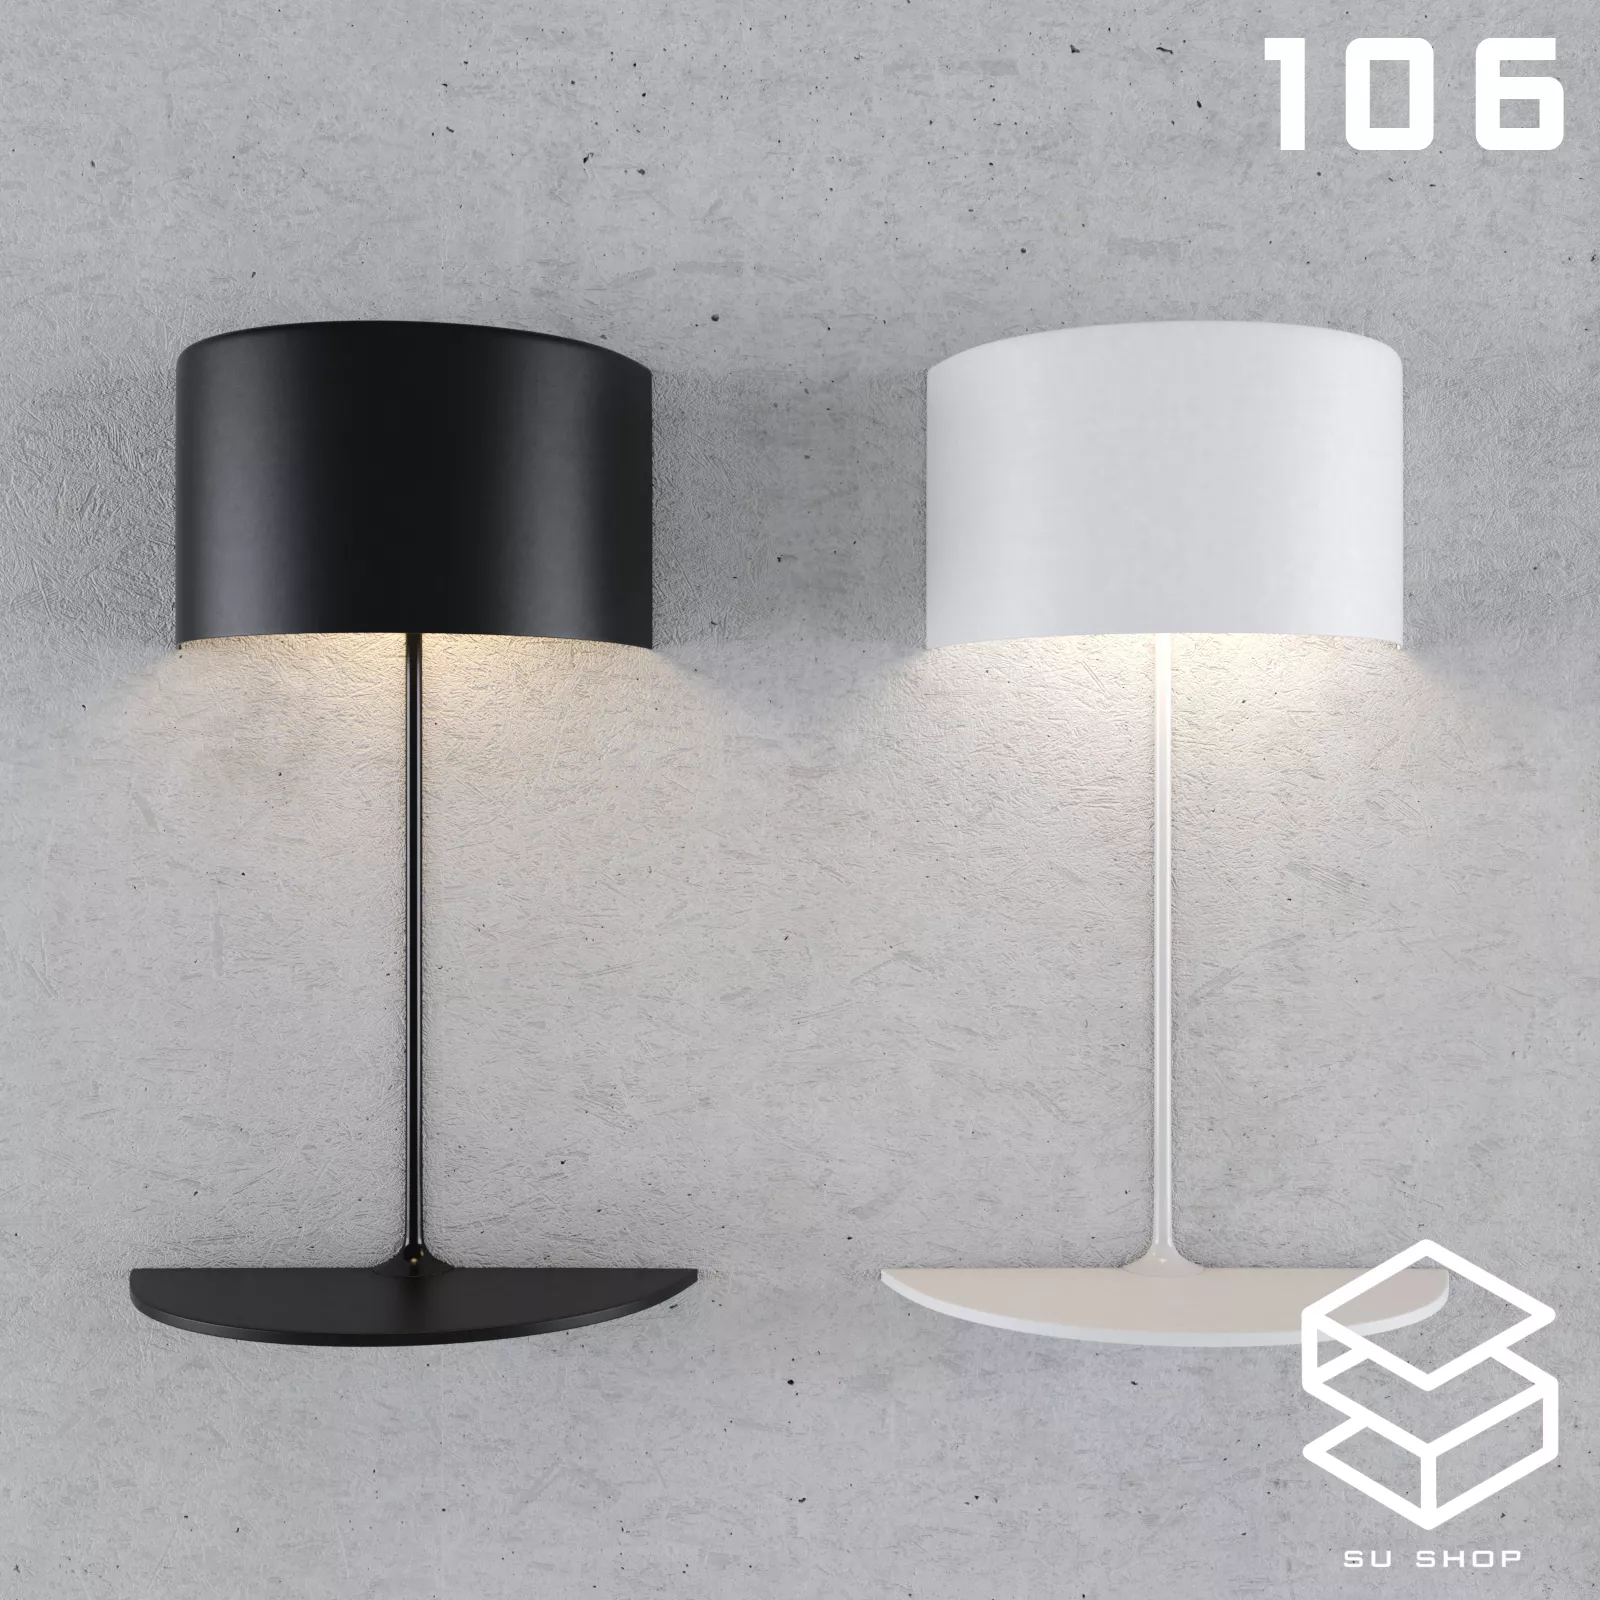 MODERN WALL LAMP - SKETCHUP 3D MODEL - VRAY OR ENSCAPE - ID16116